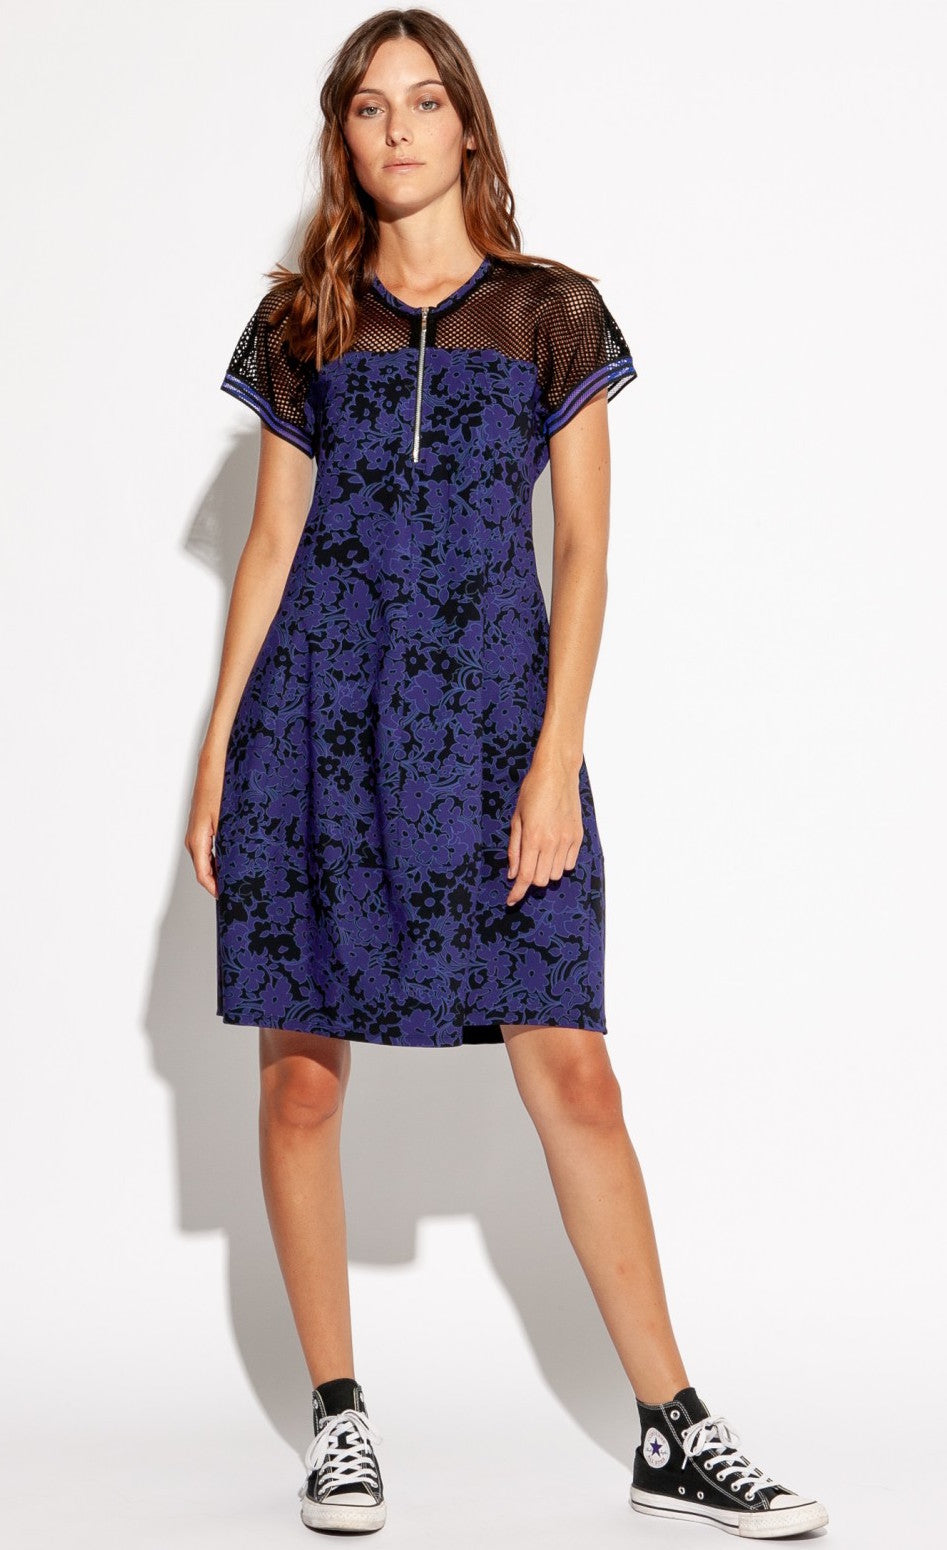 Front full body view of a woman wearing the Indies Skipy Dress. This dress is indigo blue and black with a floral print and black mesh on the shoulders and short sleeves. The dress is loose fitting with a slightly fitted waist and a cut that sits above the knees.